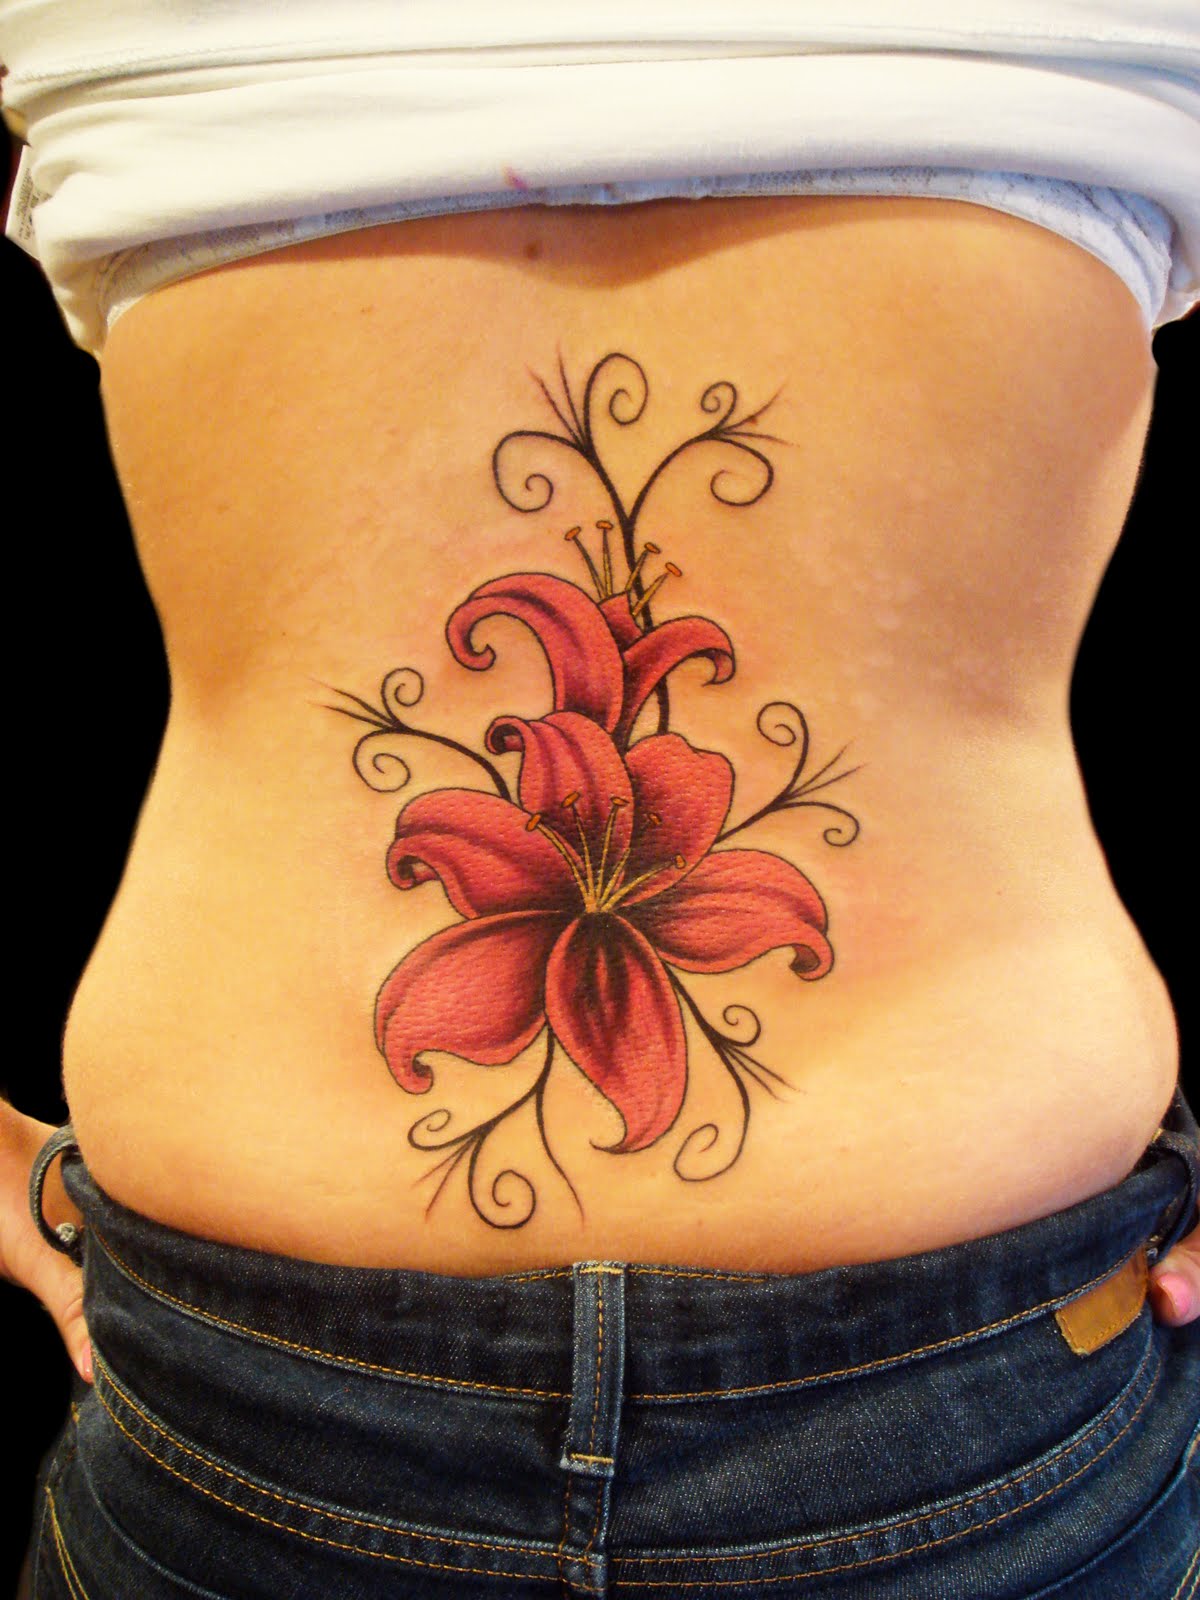 Lily Tattoos Designs, Ideas and Meaning | Tattoos For You